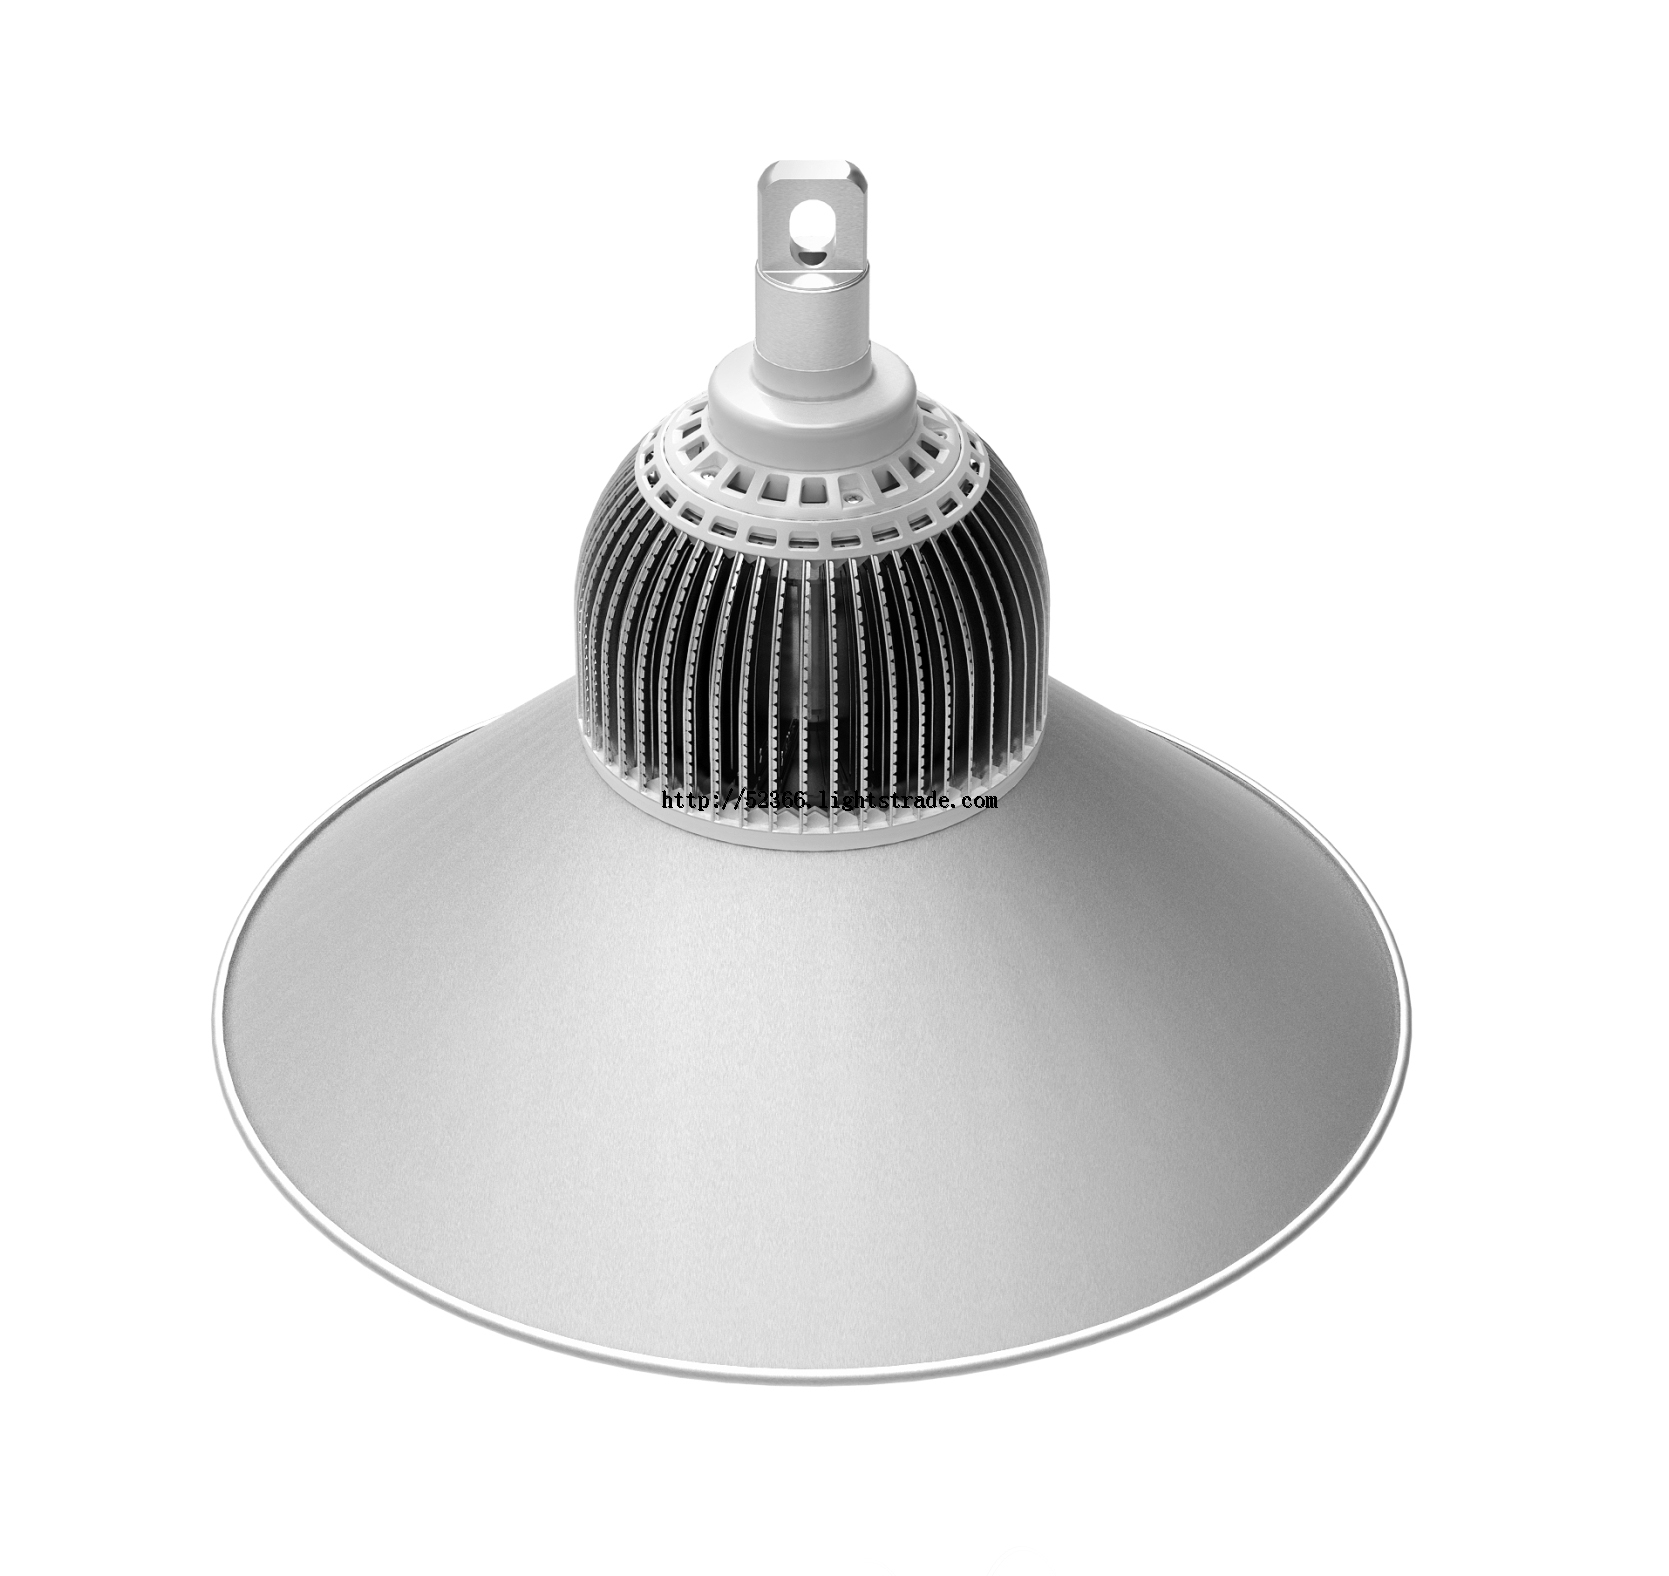 Industrial hot selling good quality LED highbay light